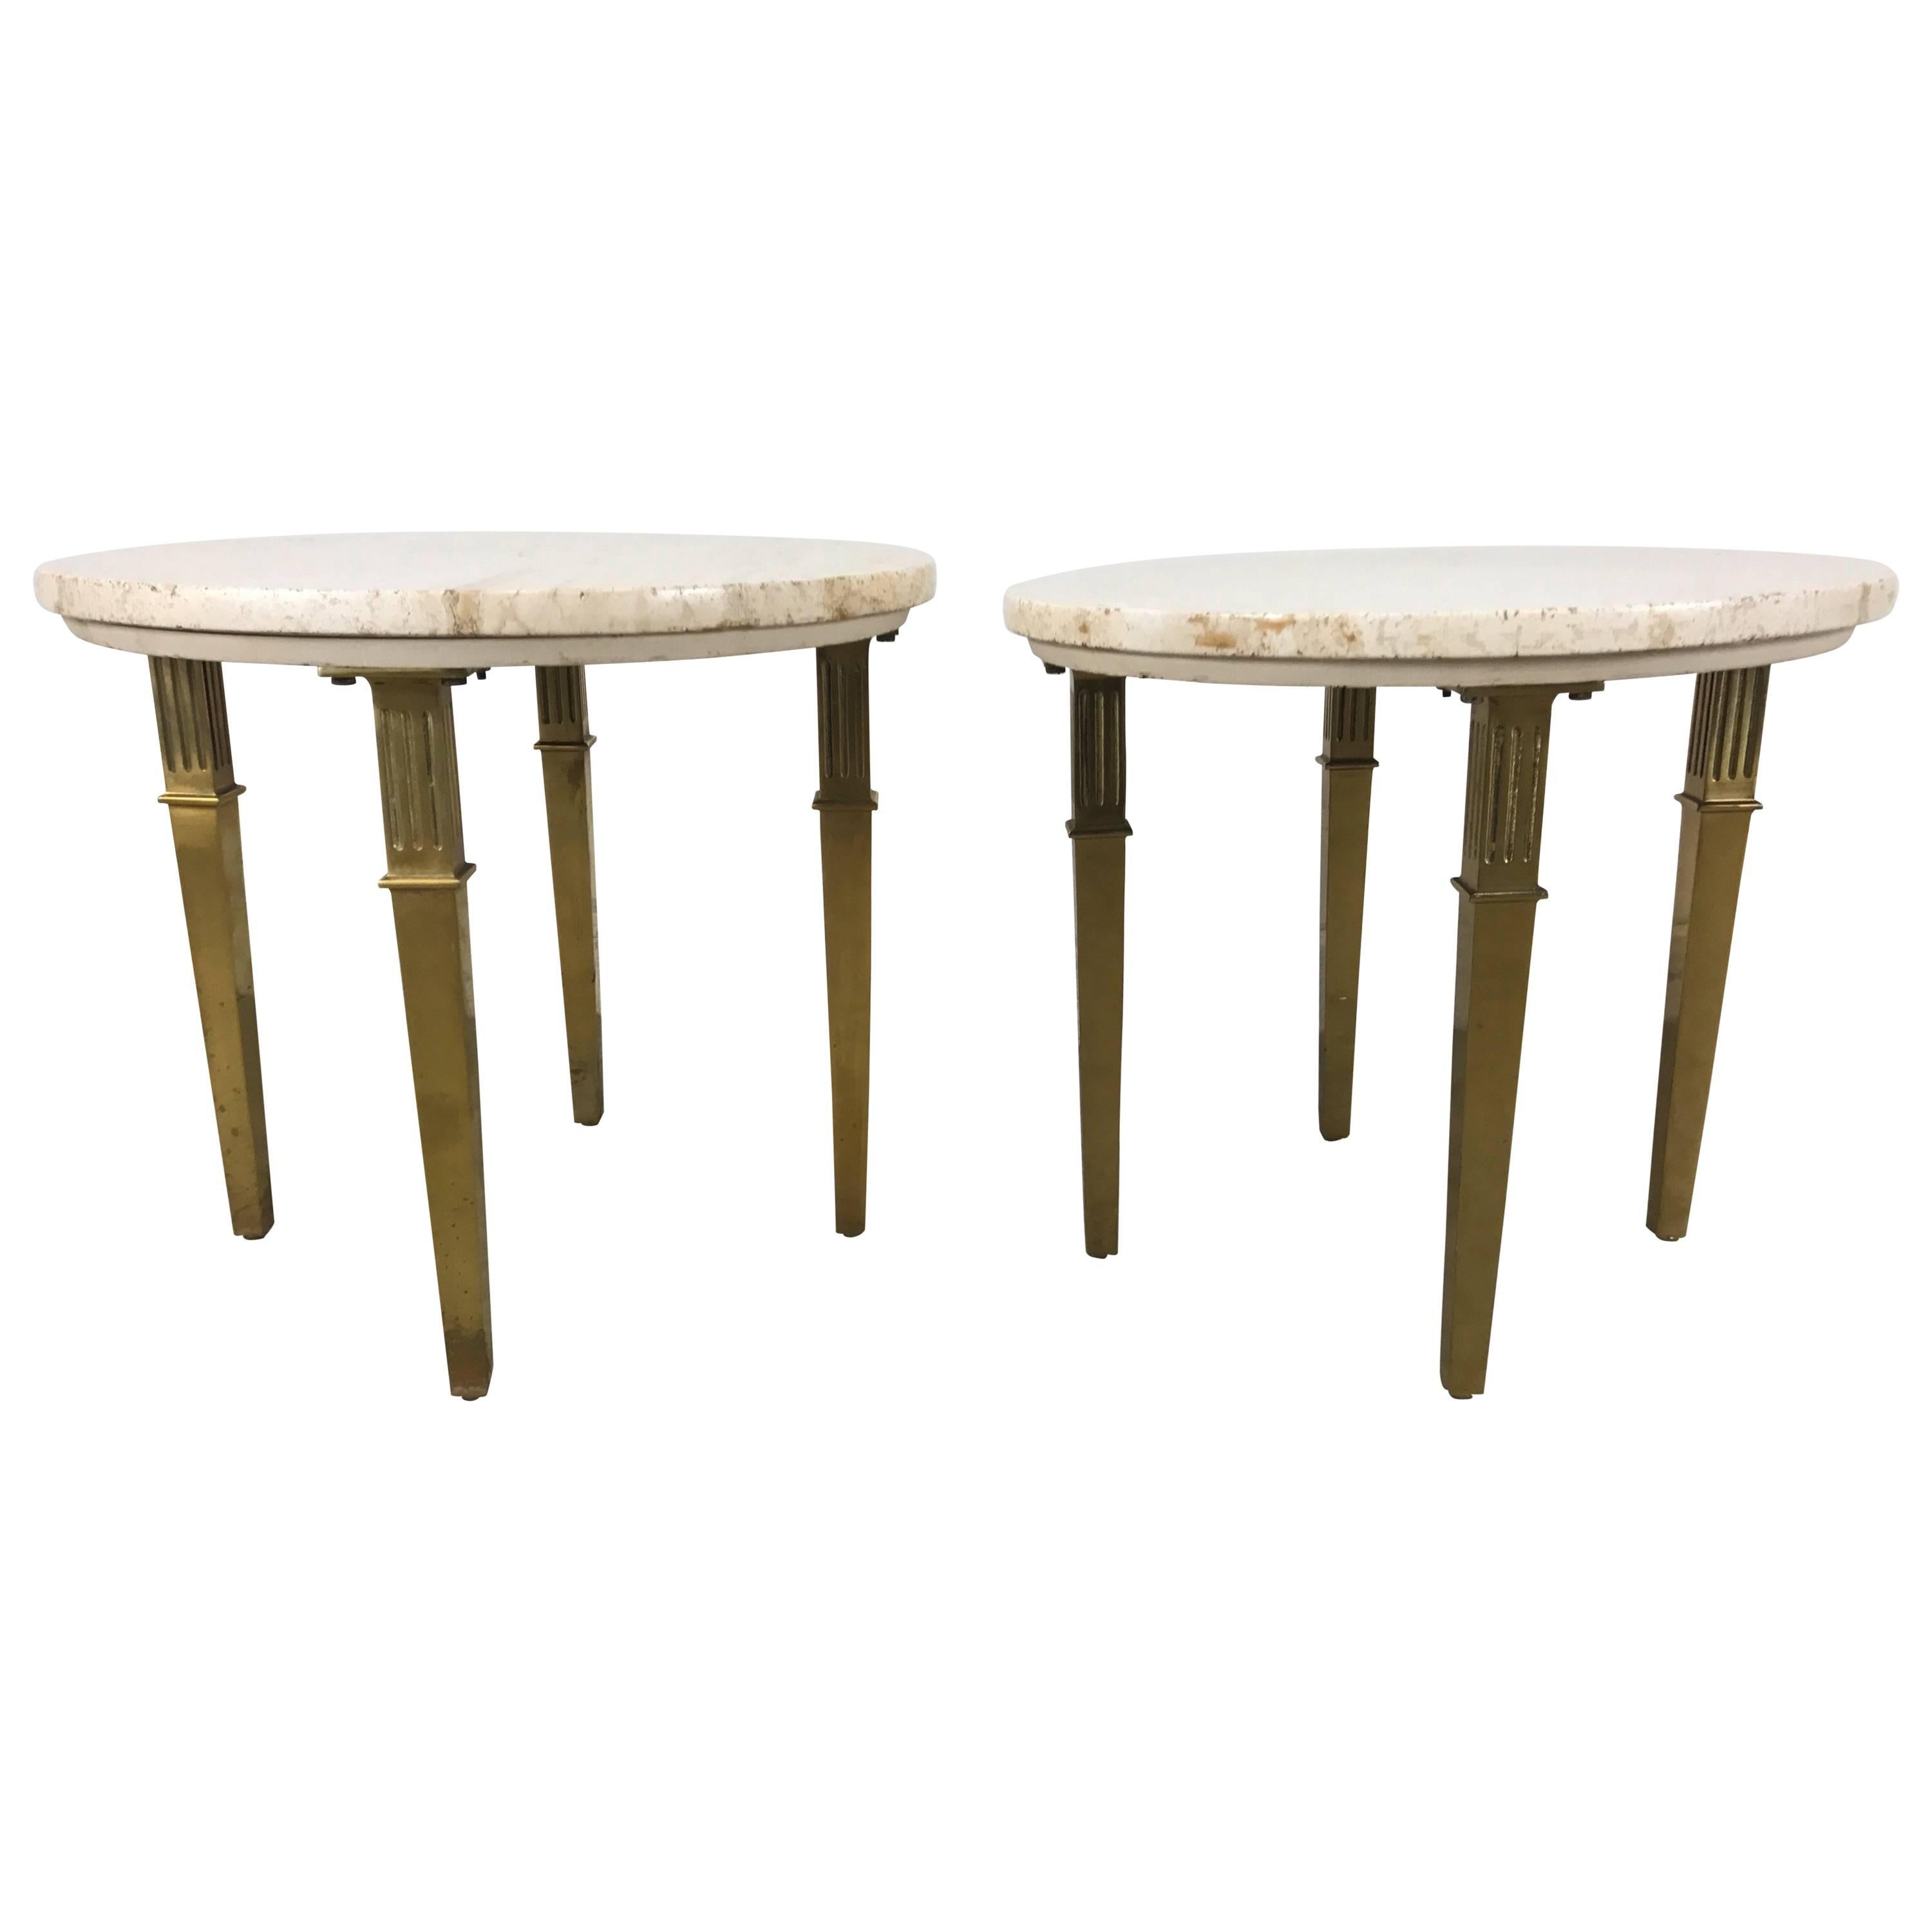 Pair Regency Marble and Brass Italian Tables Attributed to Mastercraft